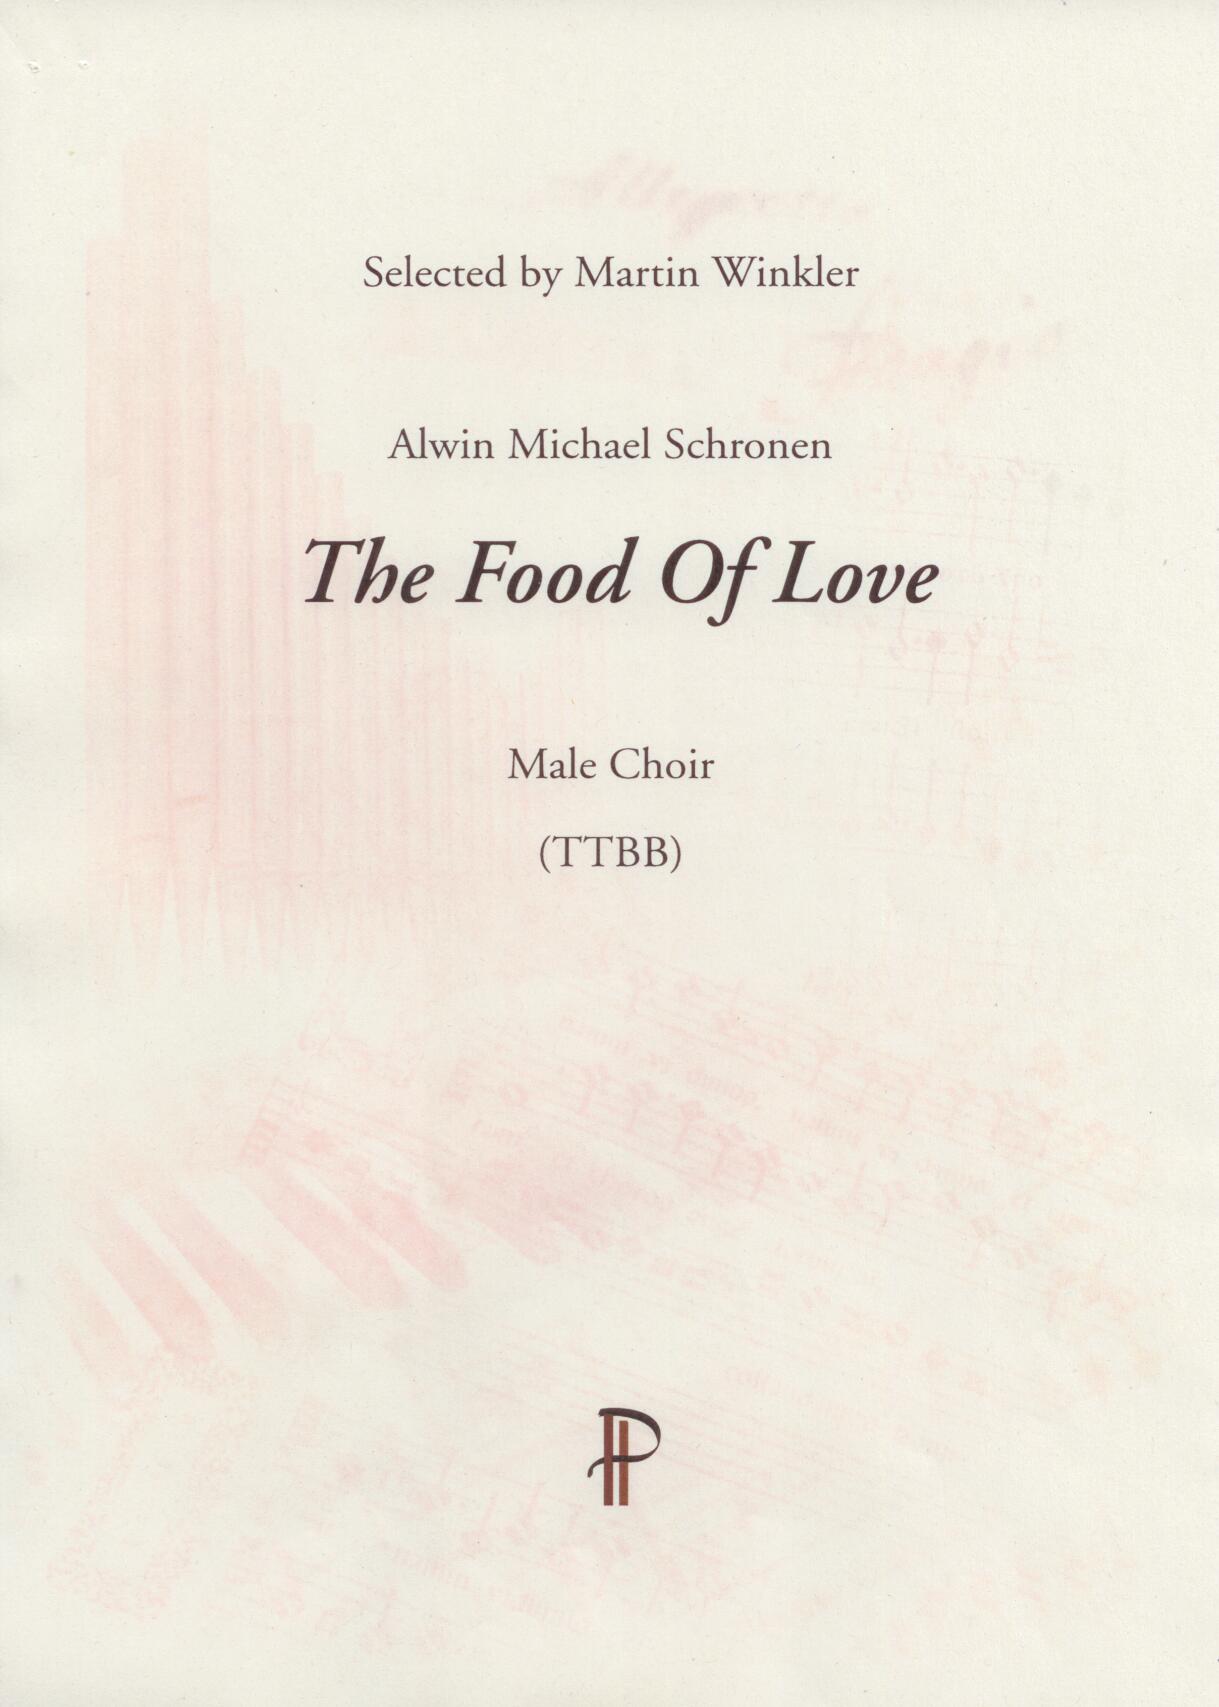 The Food Of Love - Show sample score